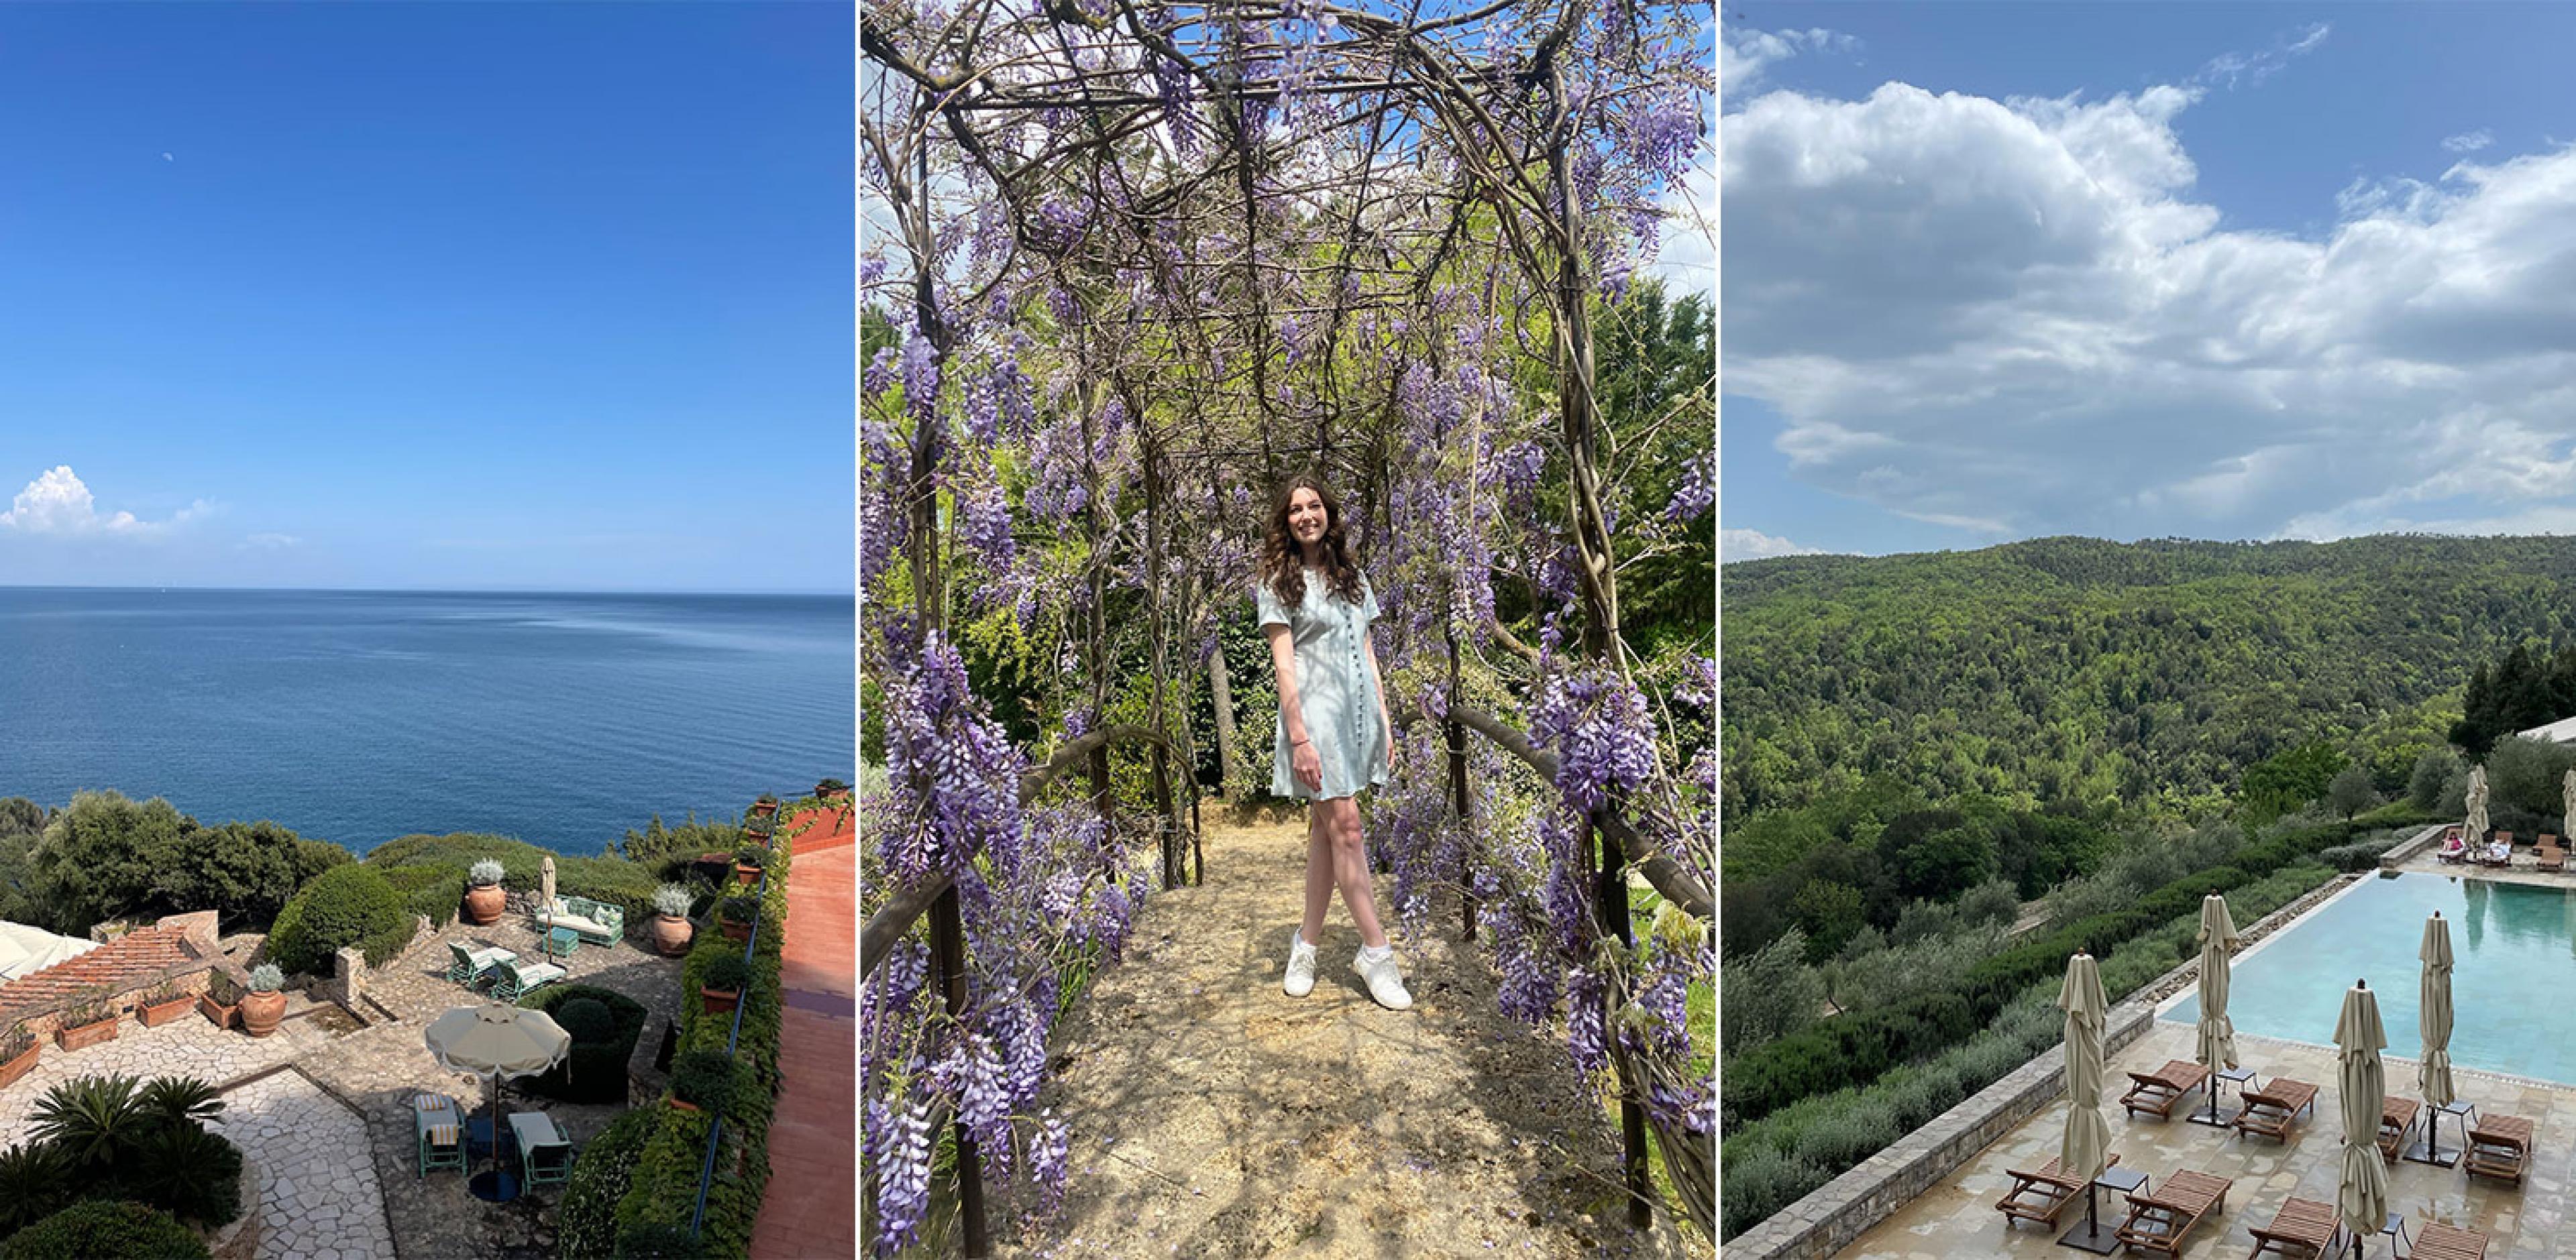 three photos, showing view over ocean from red stucco hotel; woman standing under purple flowers in an arborway, and overlooking a pool on a hill over a forest